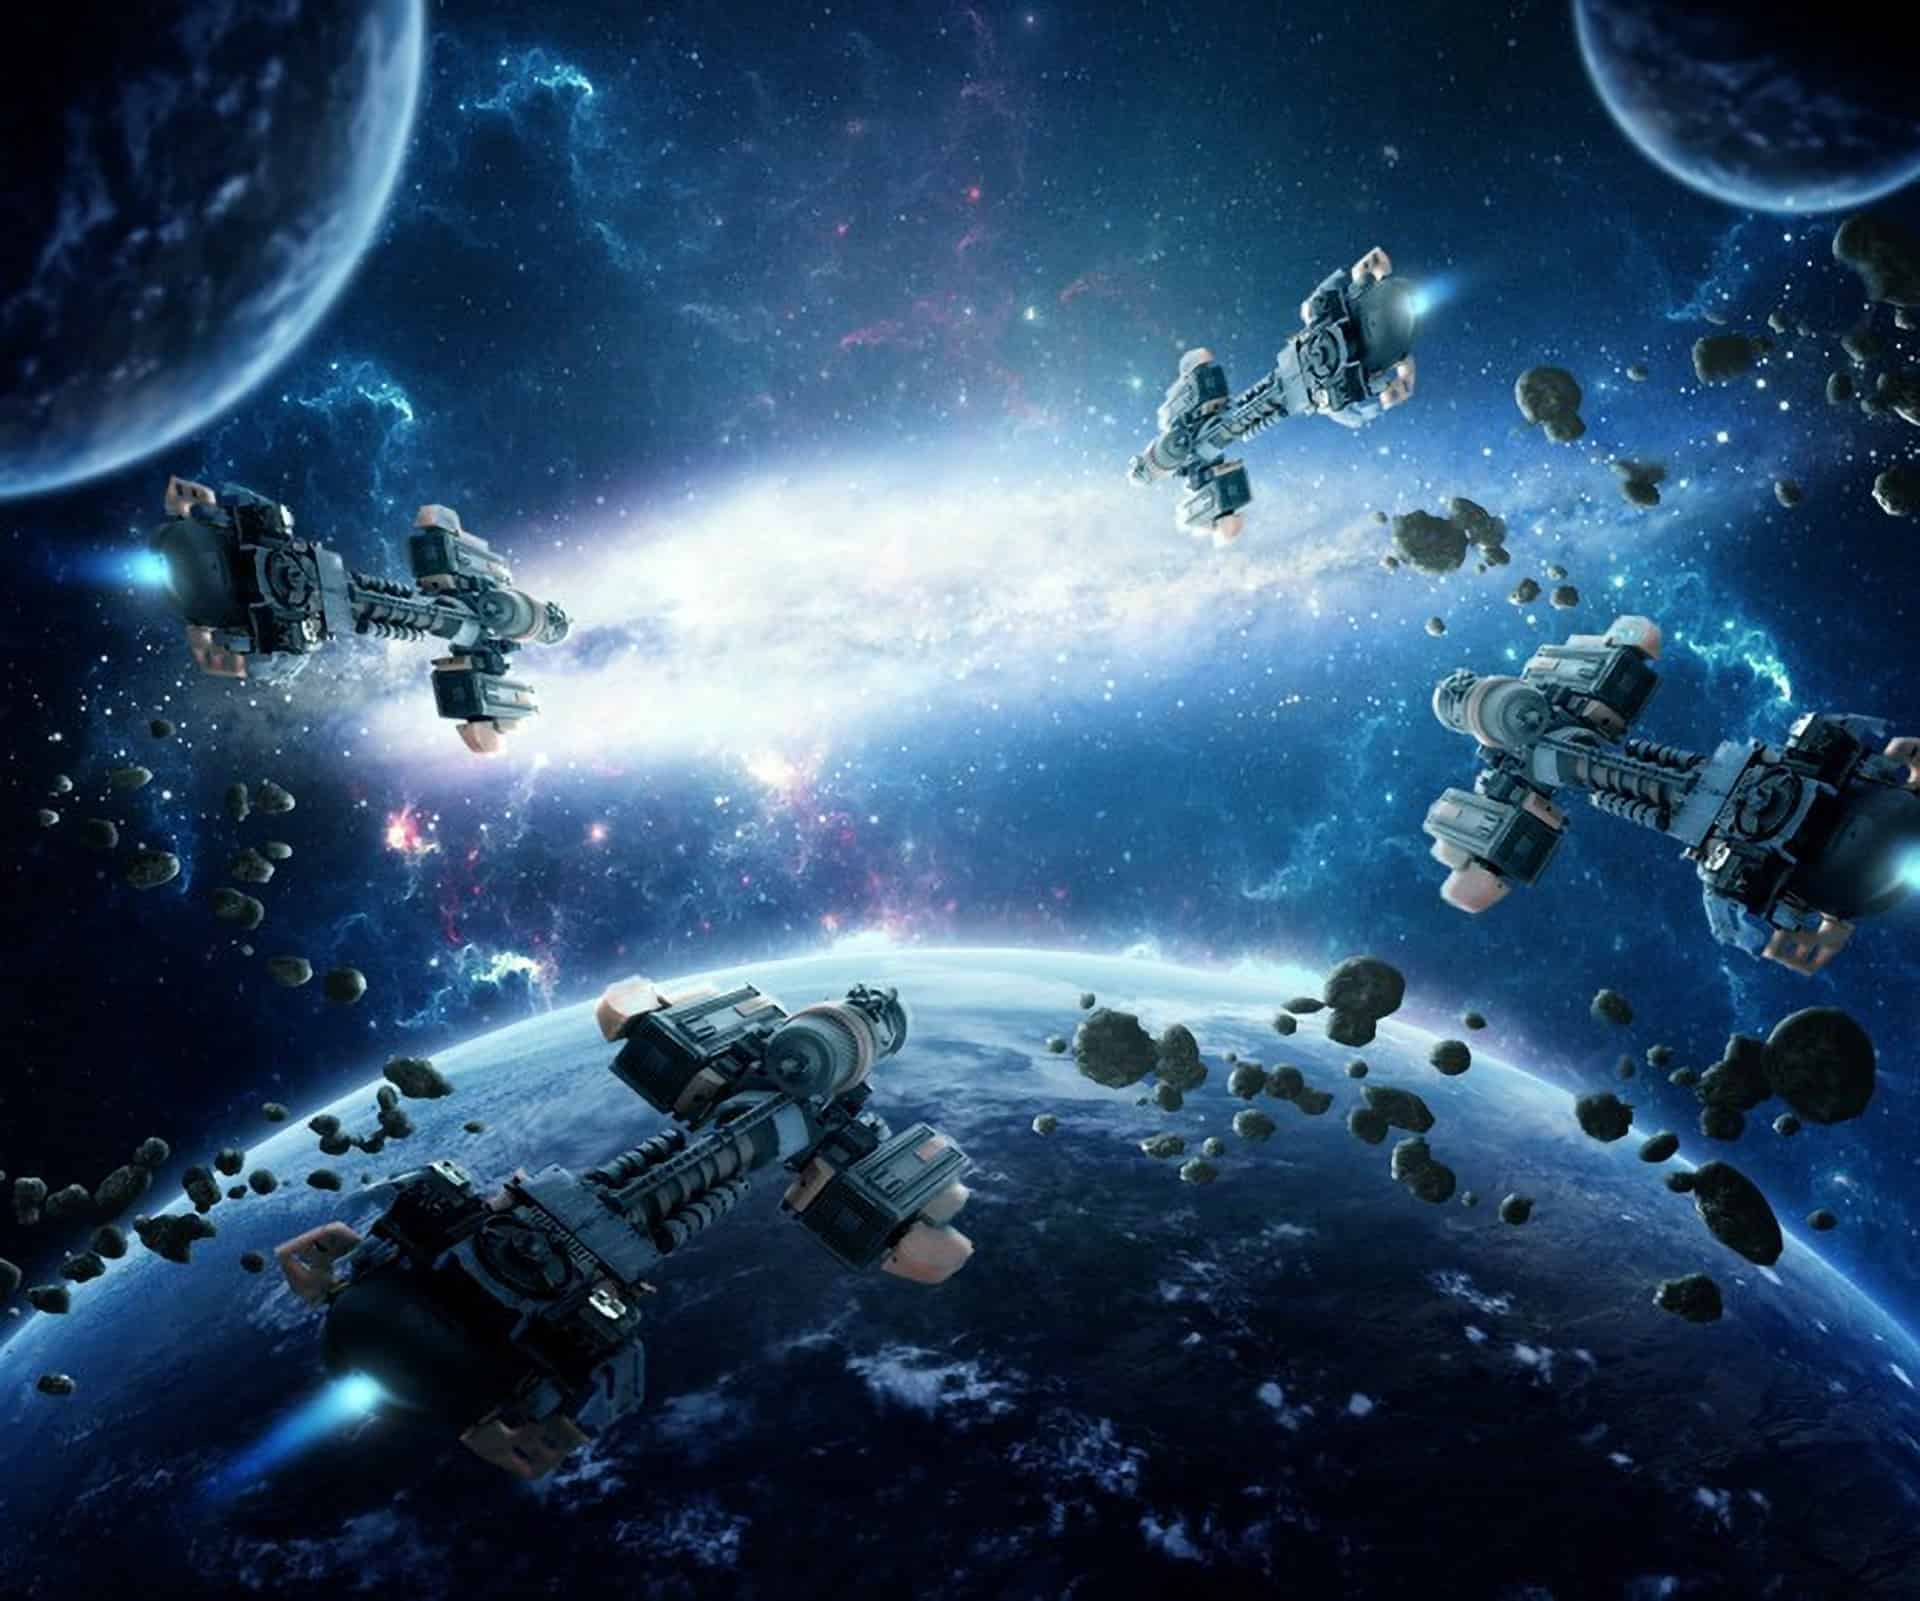 How to Create an Amazing Space Battle Scene in Photoshop